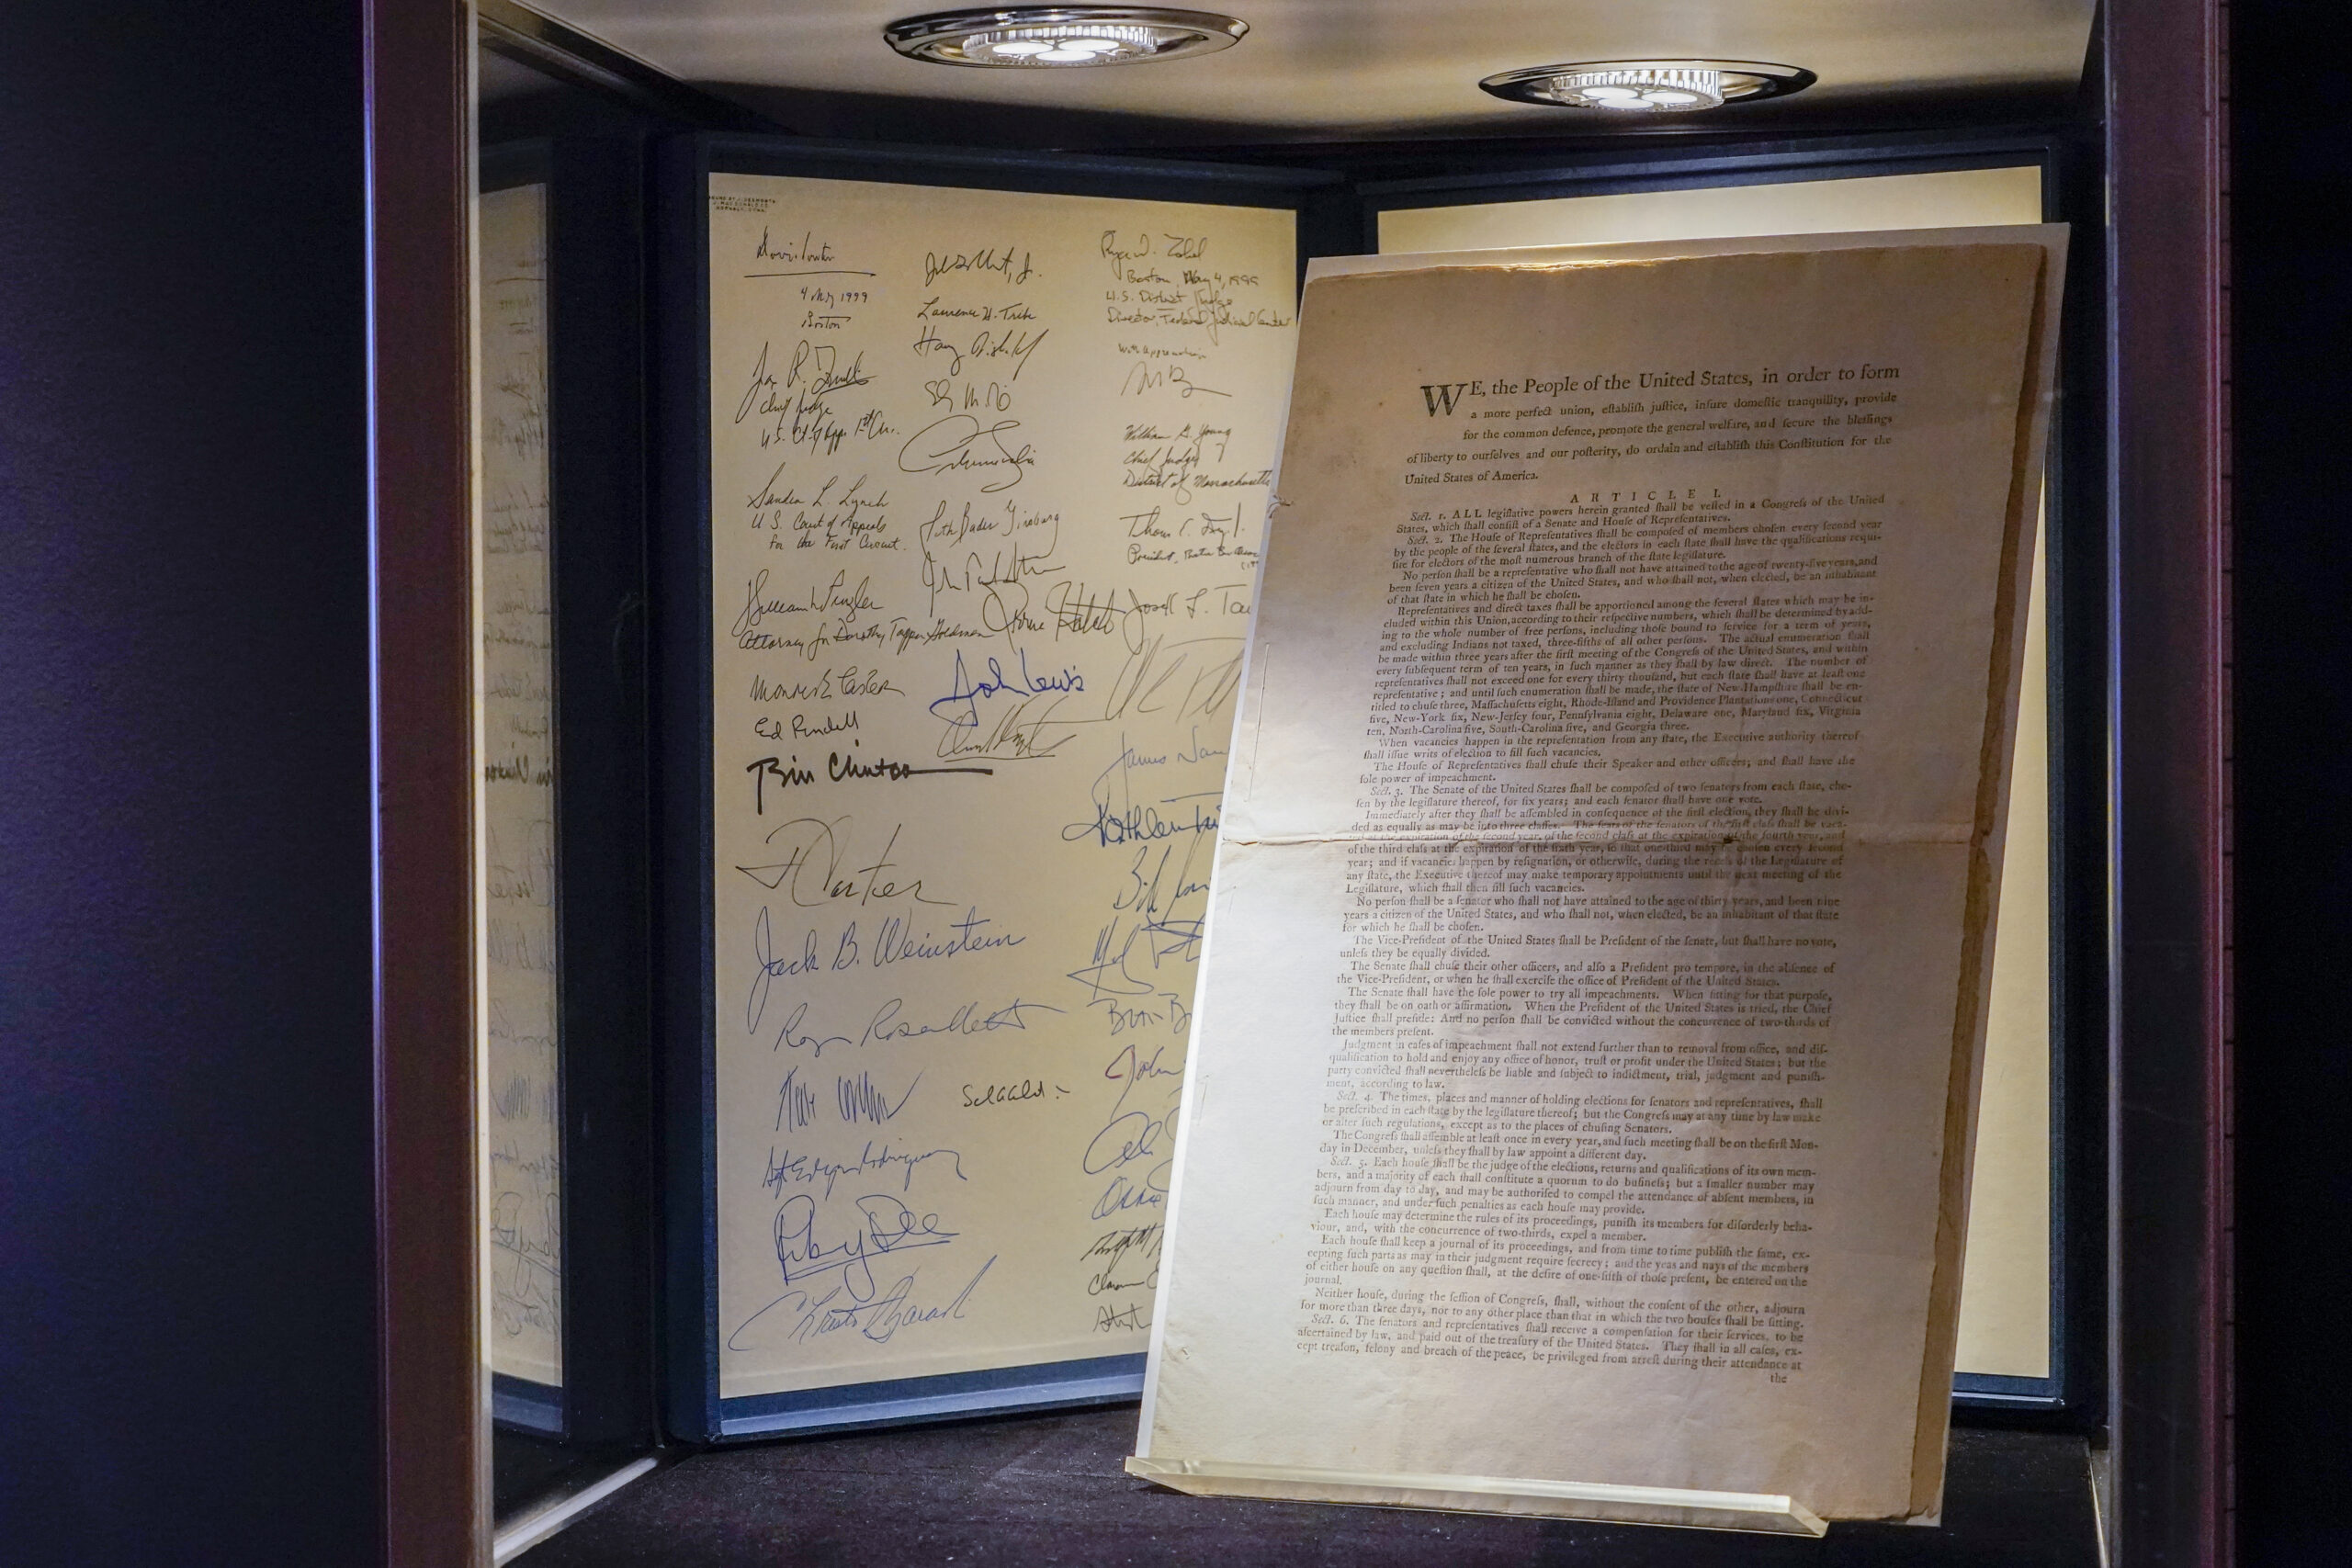 FILE - A first printing of the United States Constitution is displayed at Sotheby's auction house during a press preview on Nov. 5, 2021, in New York. The rare copy has sold Thursday, Nov. 18, for a record $43.2 million at Sotheby's to an anonymous buyer who outbid a group of crypocurrency investors. (AP Photo/Mary Altaffer, File)